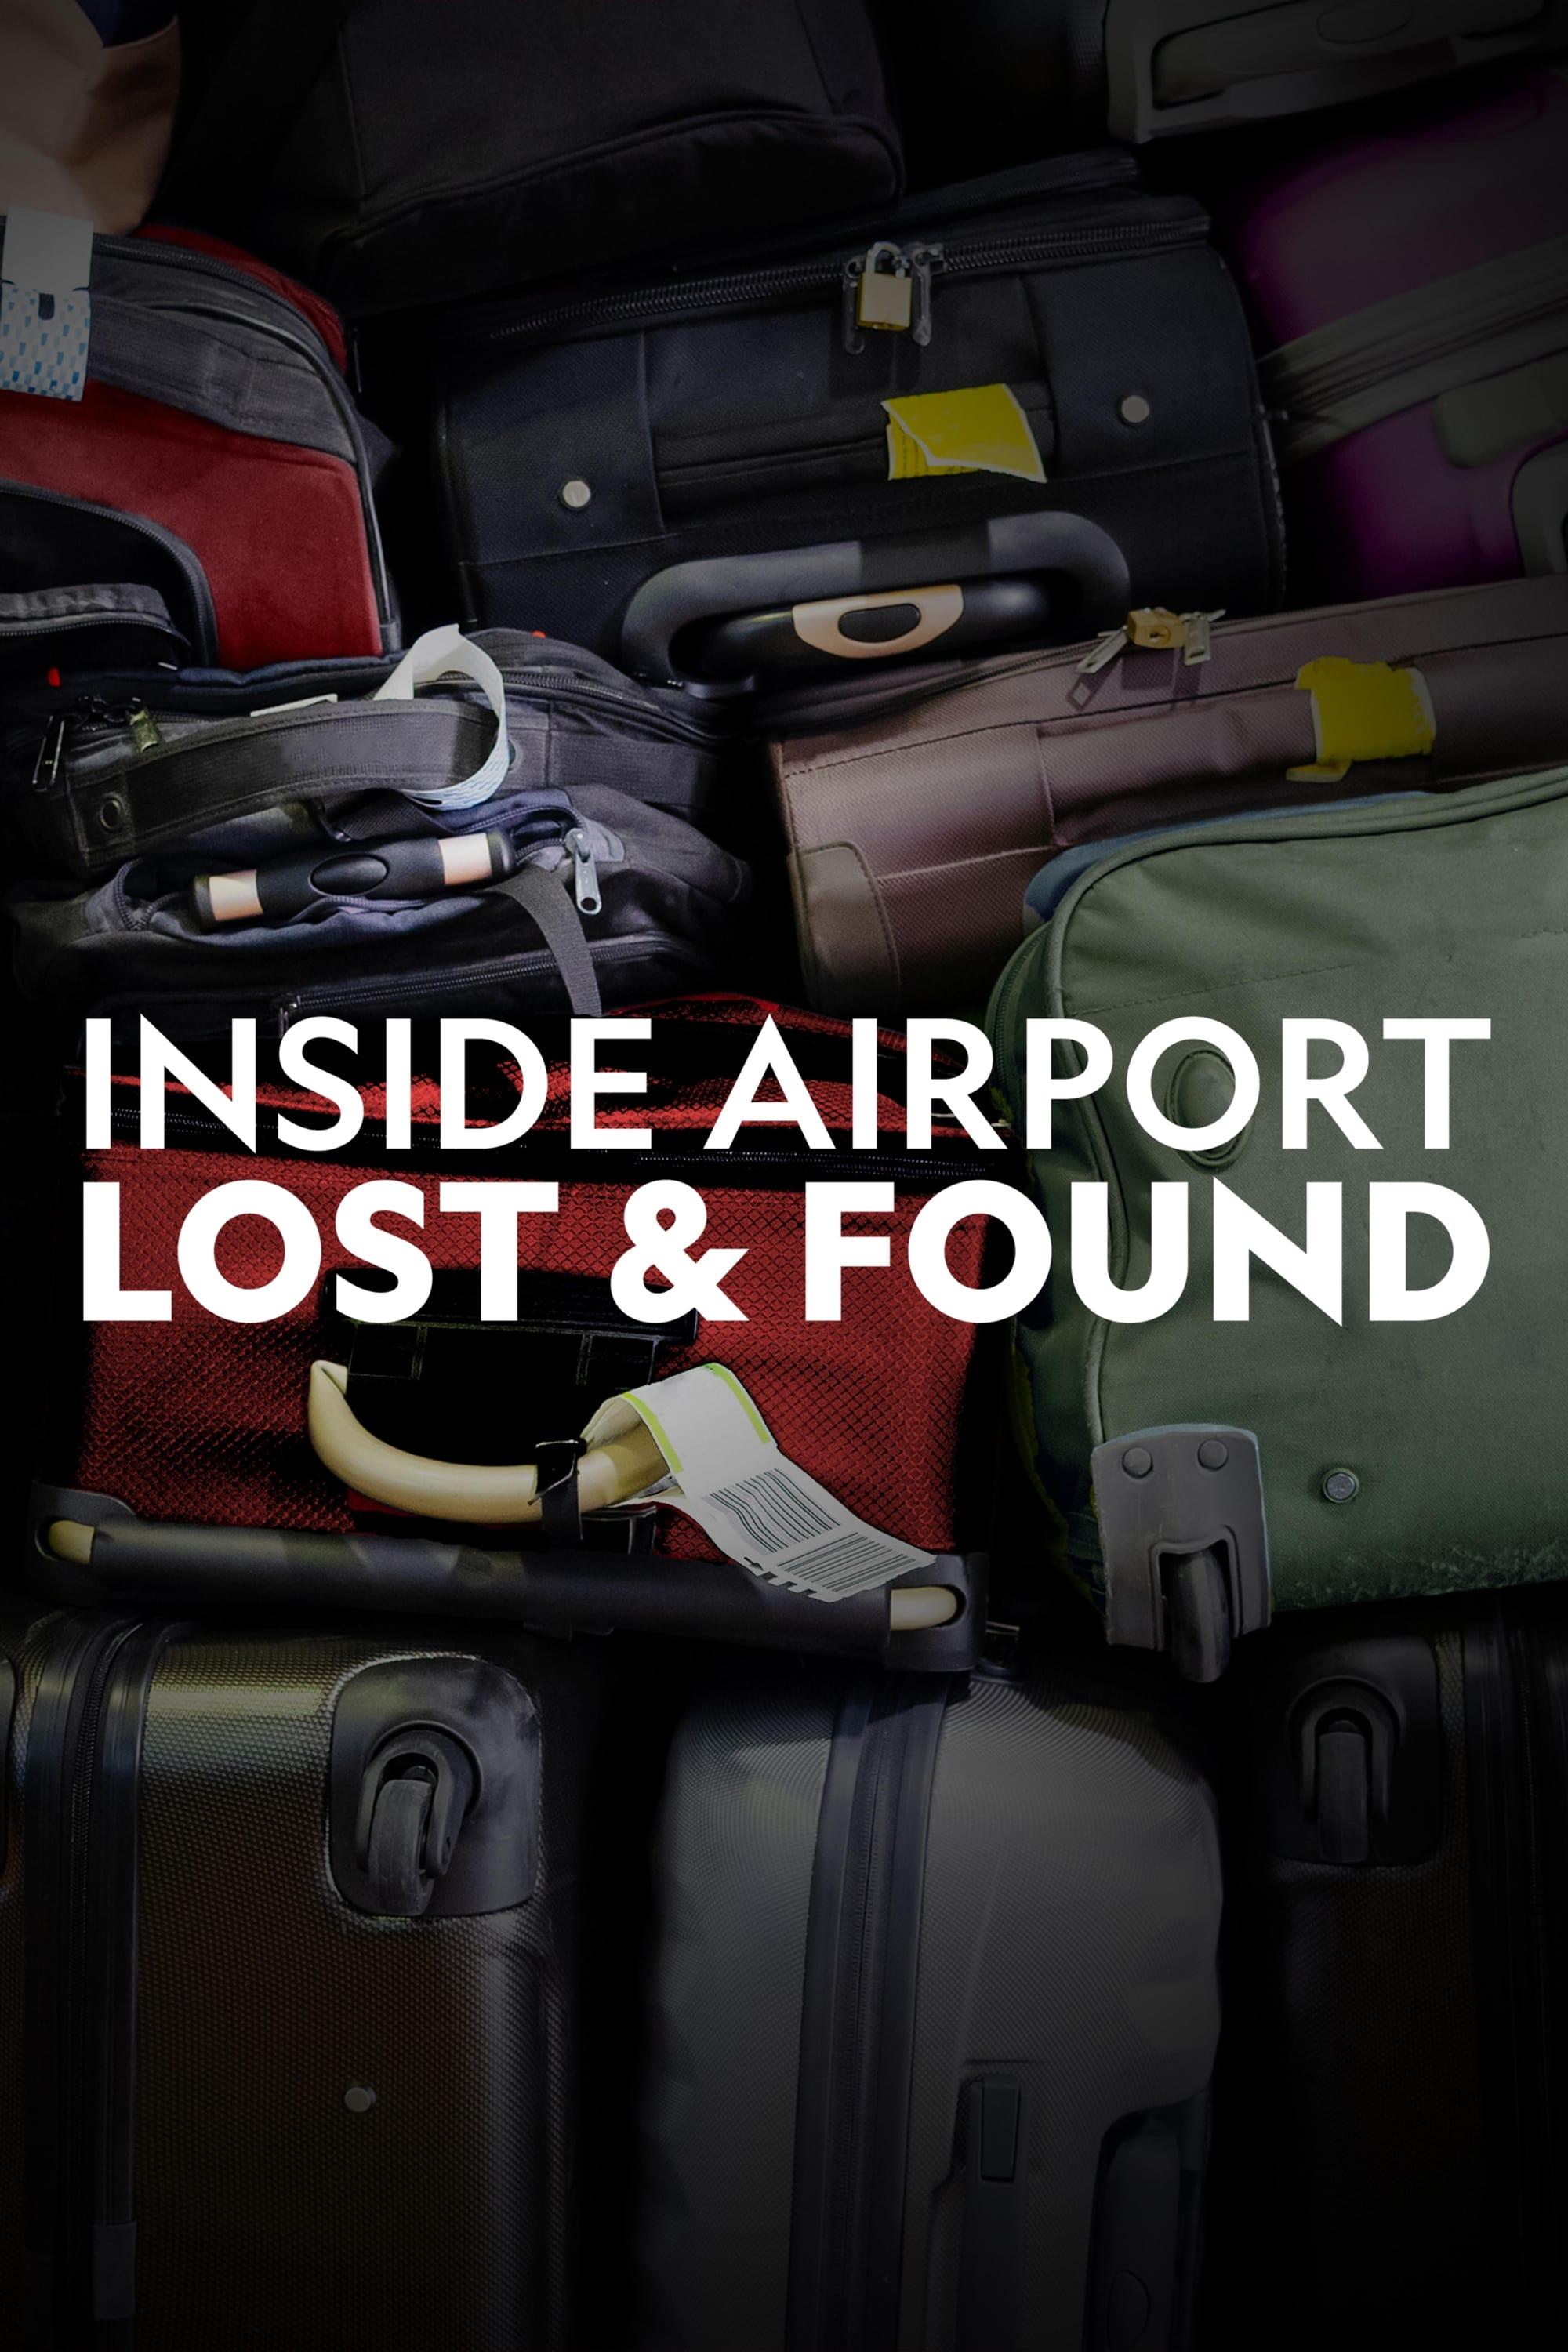 Inside Airport Lost & Found poster